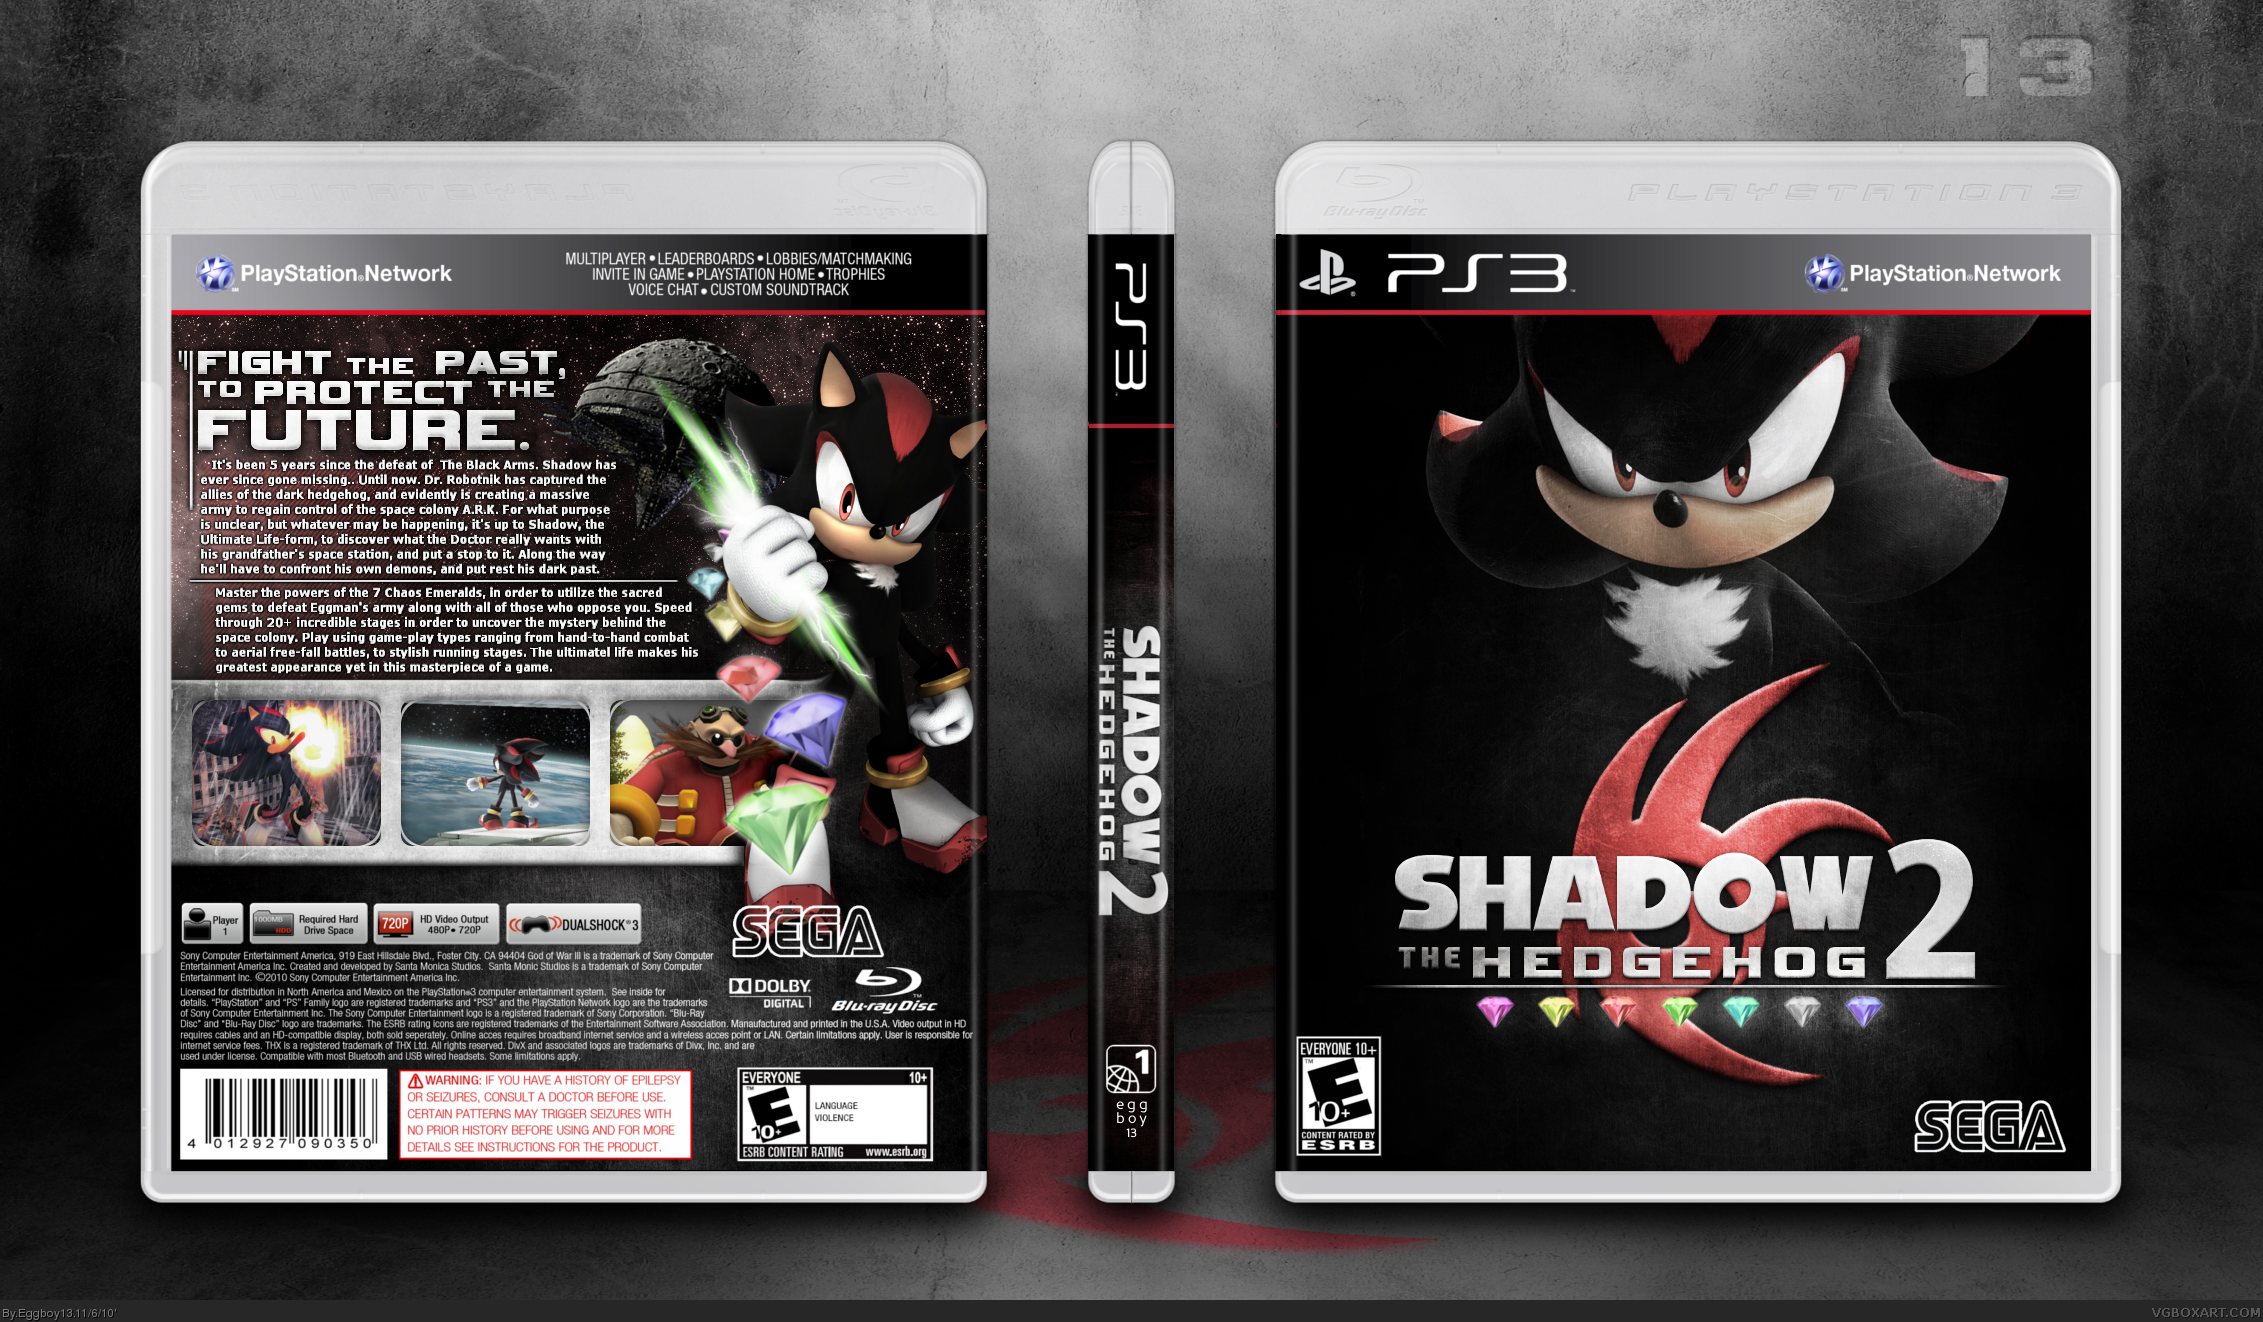 X game shadow